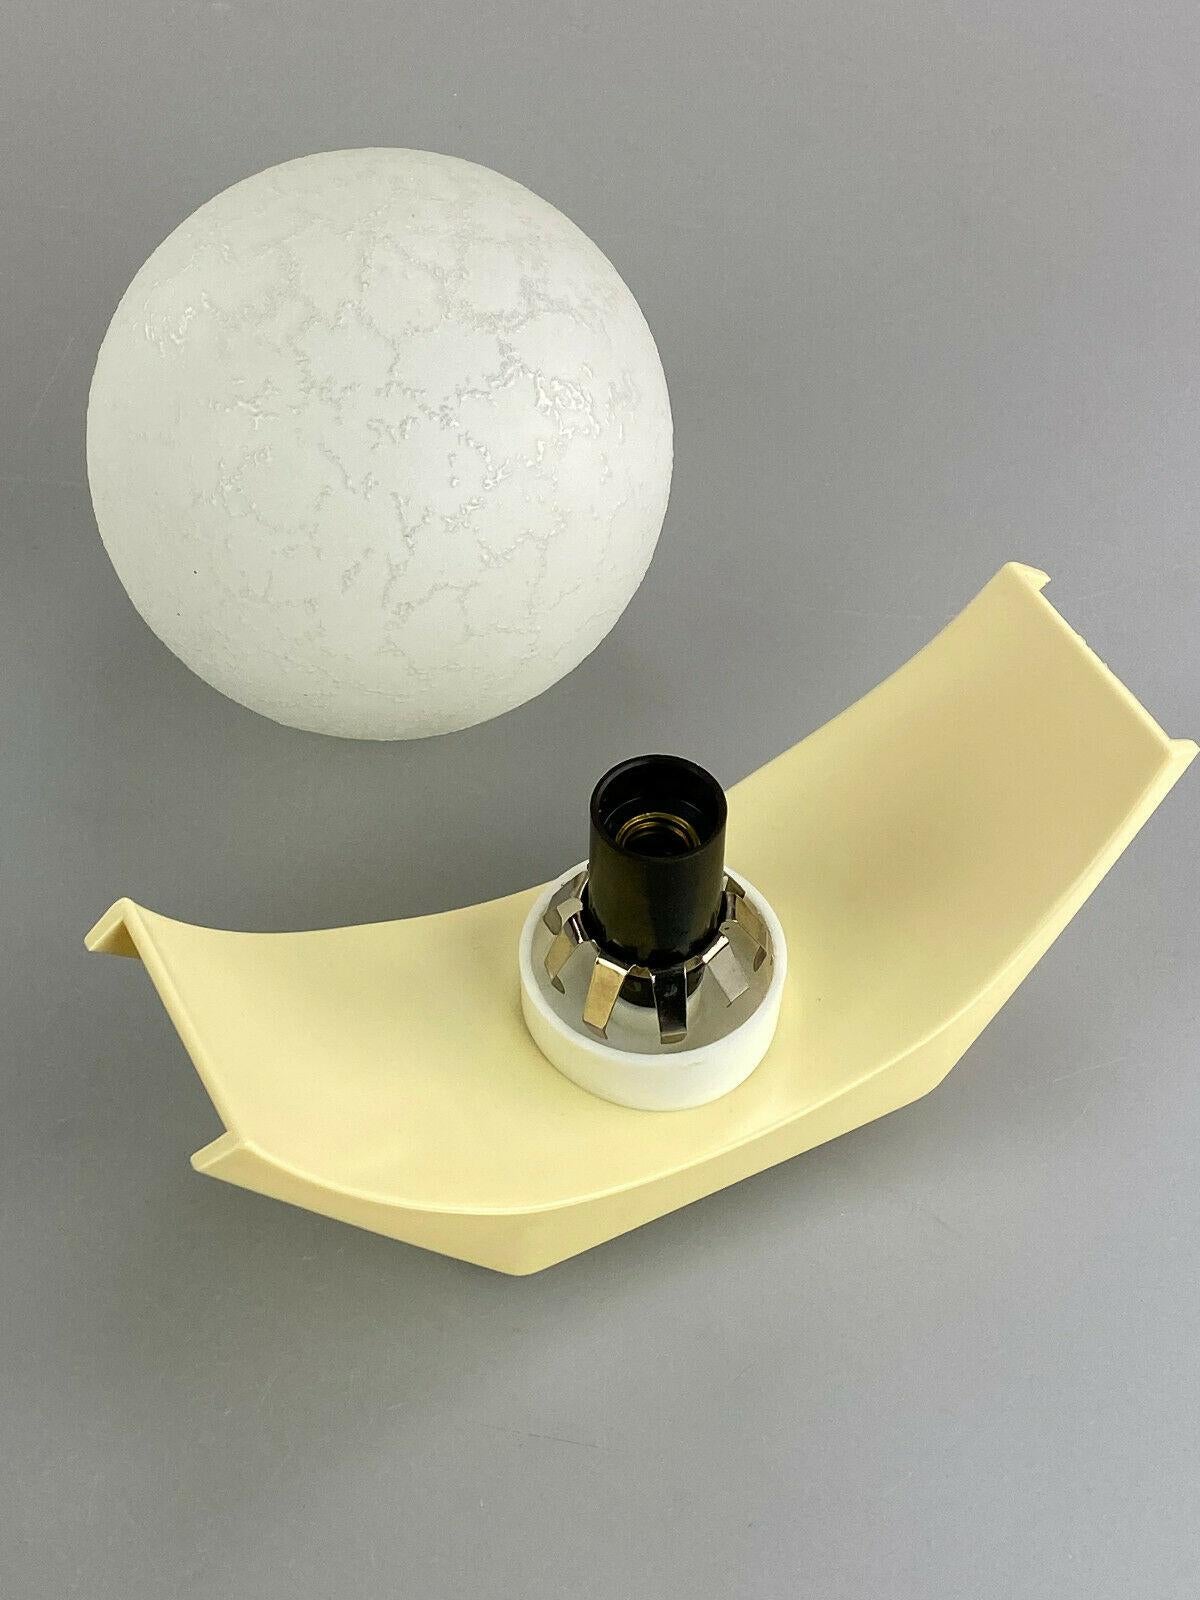 60s 70s Wall Lamp Ball Lamp Lamp Light Space Age Design For Sale 3